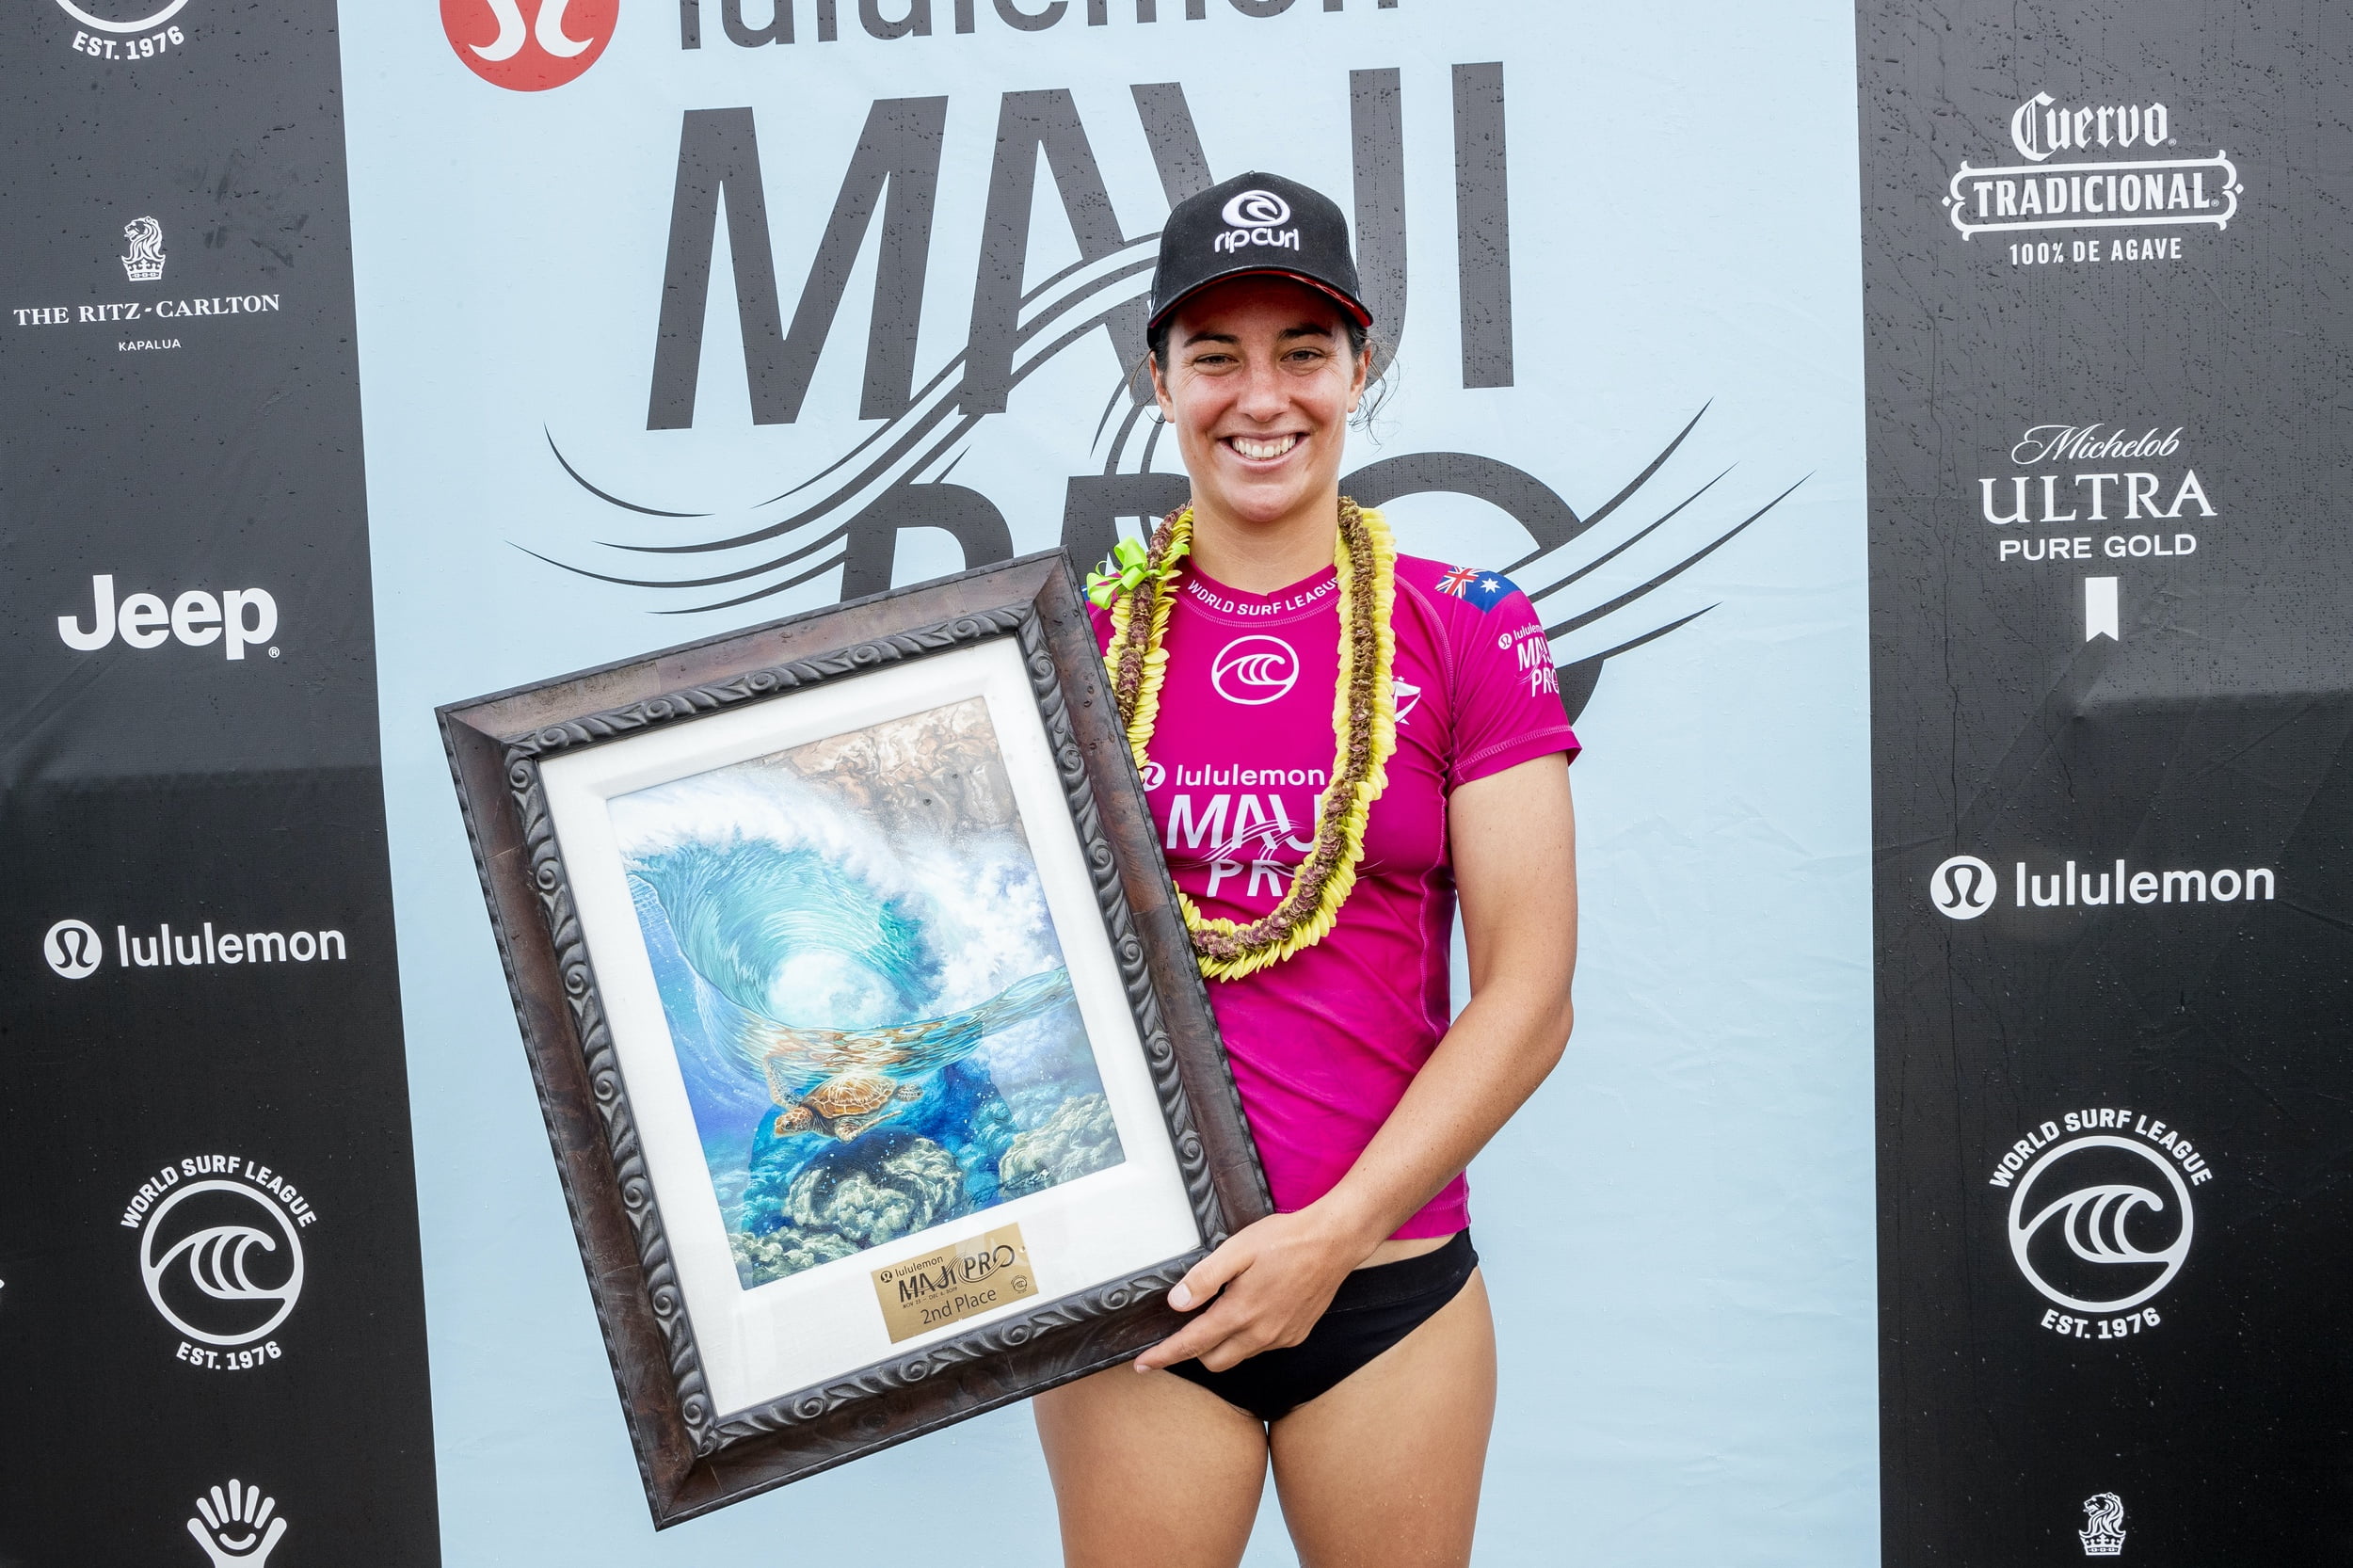 MAUI, UNITED STATES - DECEMBER 2: Two-time WSL Champion Tyler Wright of Australia placed runner-up in the 2019 lululemon Maui Pro 2019 at Honolua Bay on December 2, 2019 in Maui, United States.  (Photo by Kelly Cestari/WSL via Getty Images)